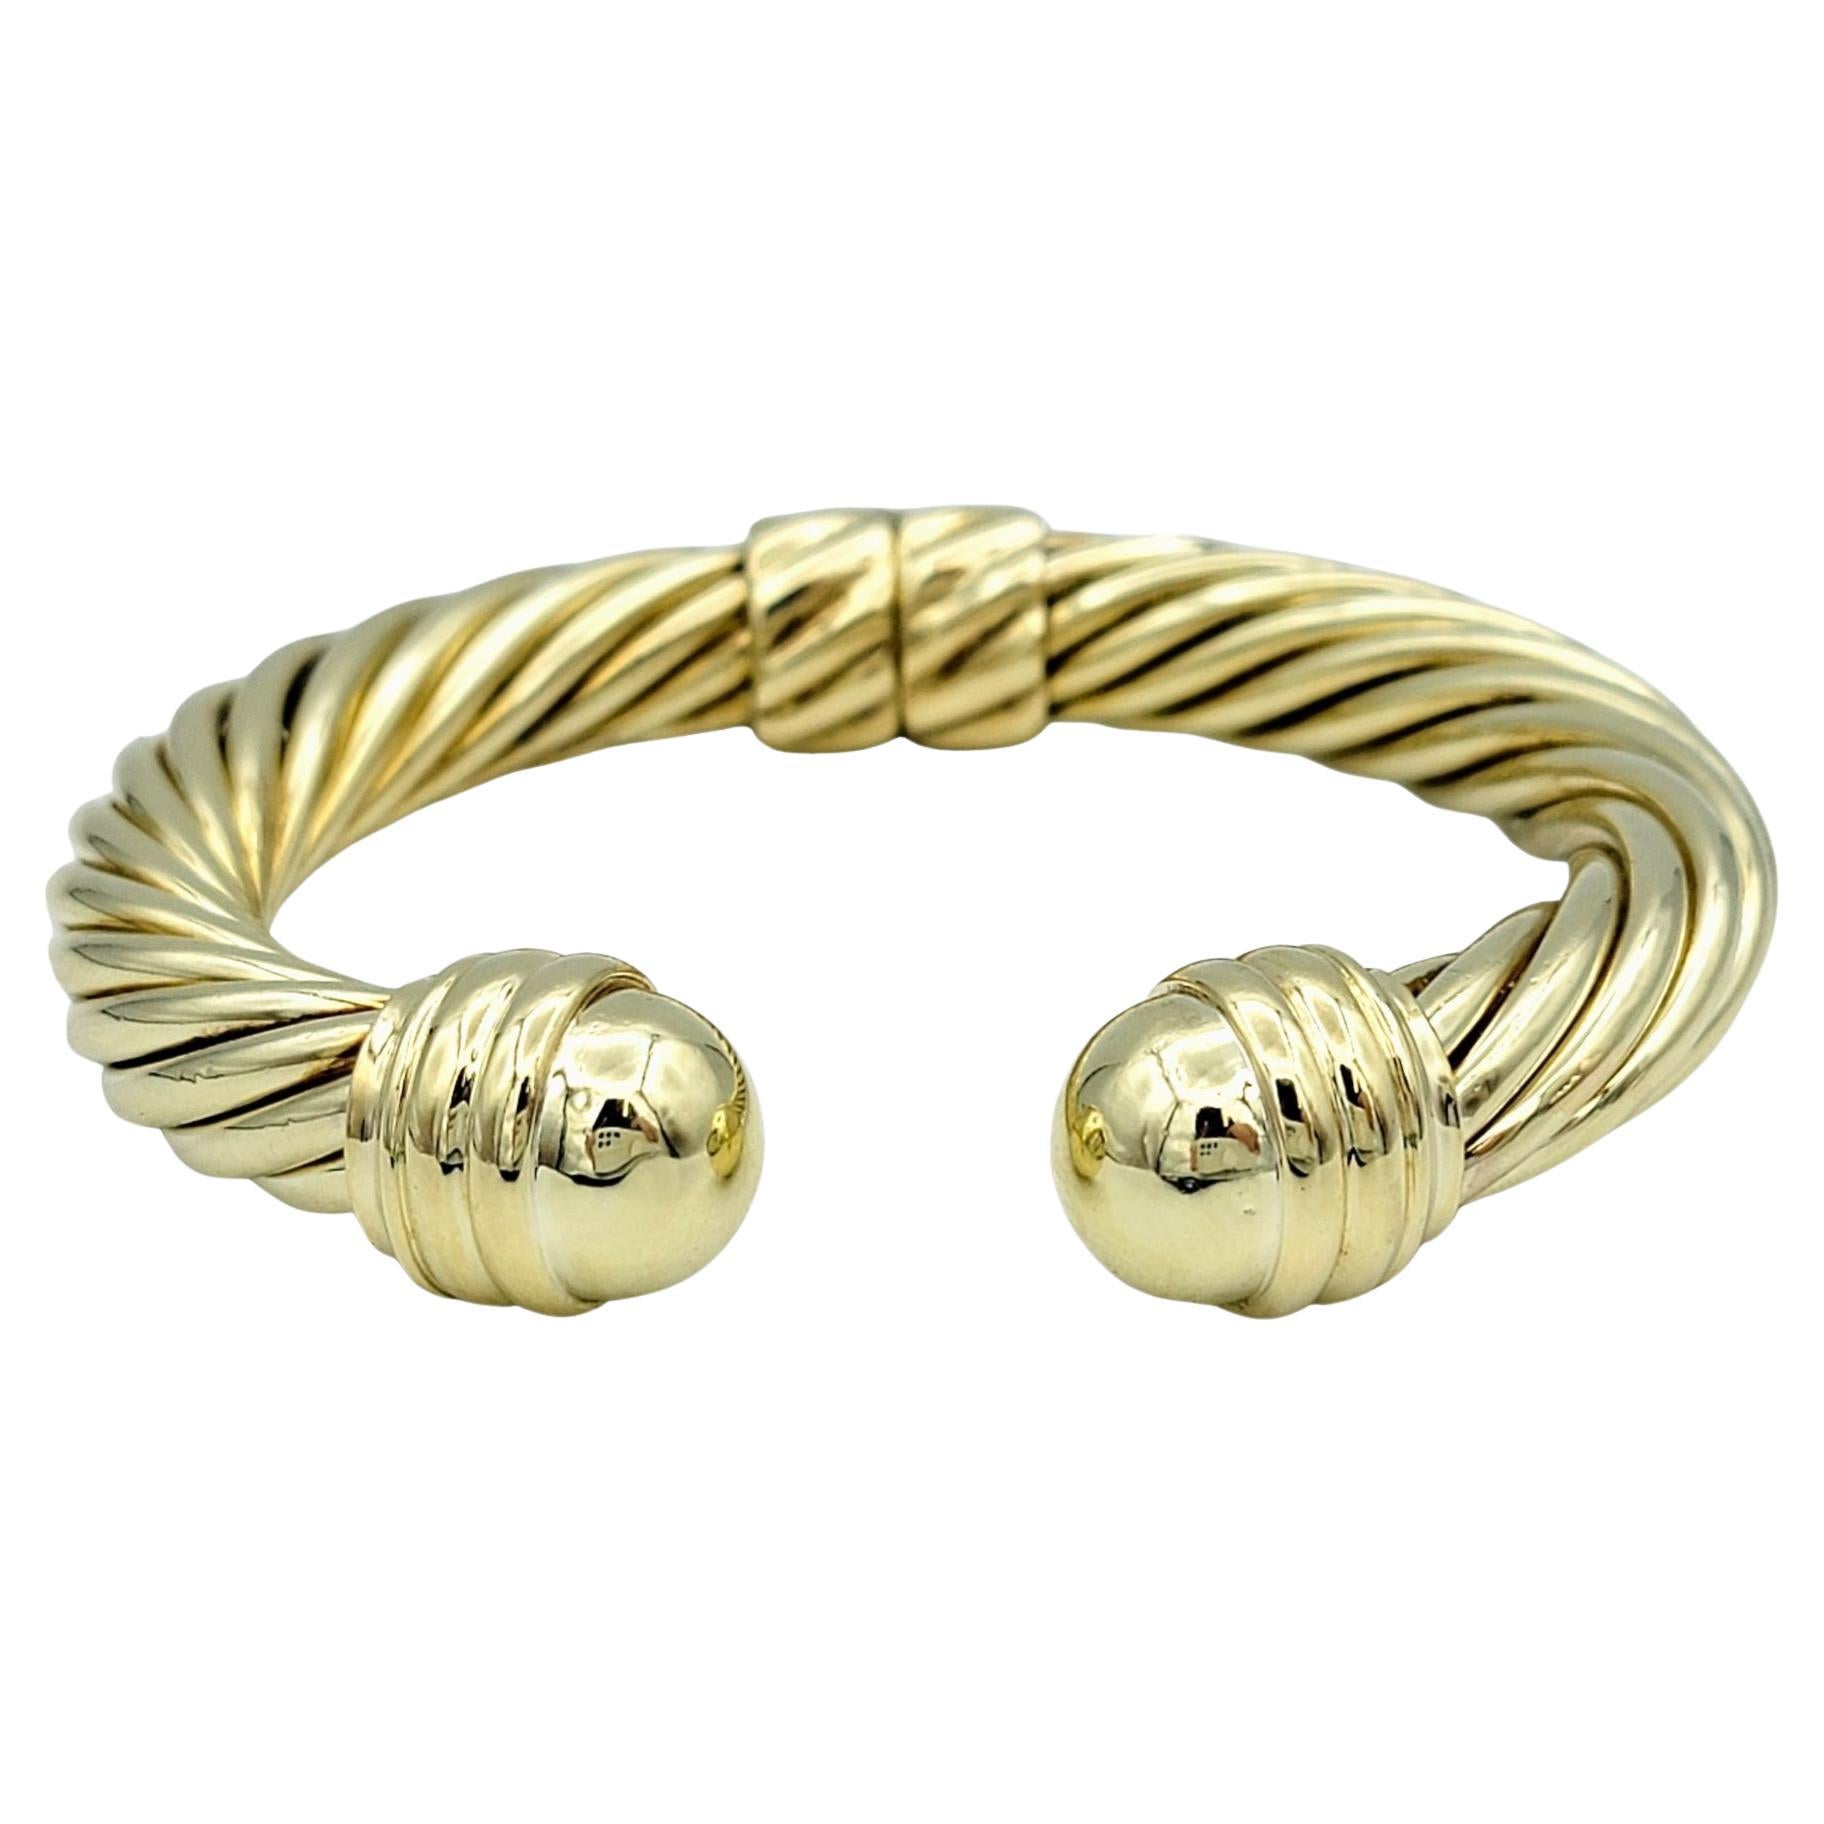 David Yurman 10mm Sculpted Cable Cuff Bracelet in Yellow Gold with Pave  Diamonds, size medium | Lee Michaels Fine Jewelry stores